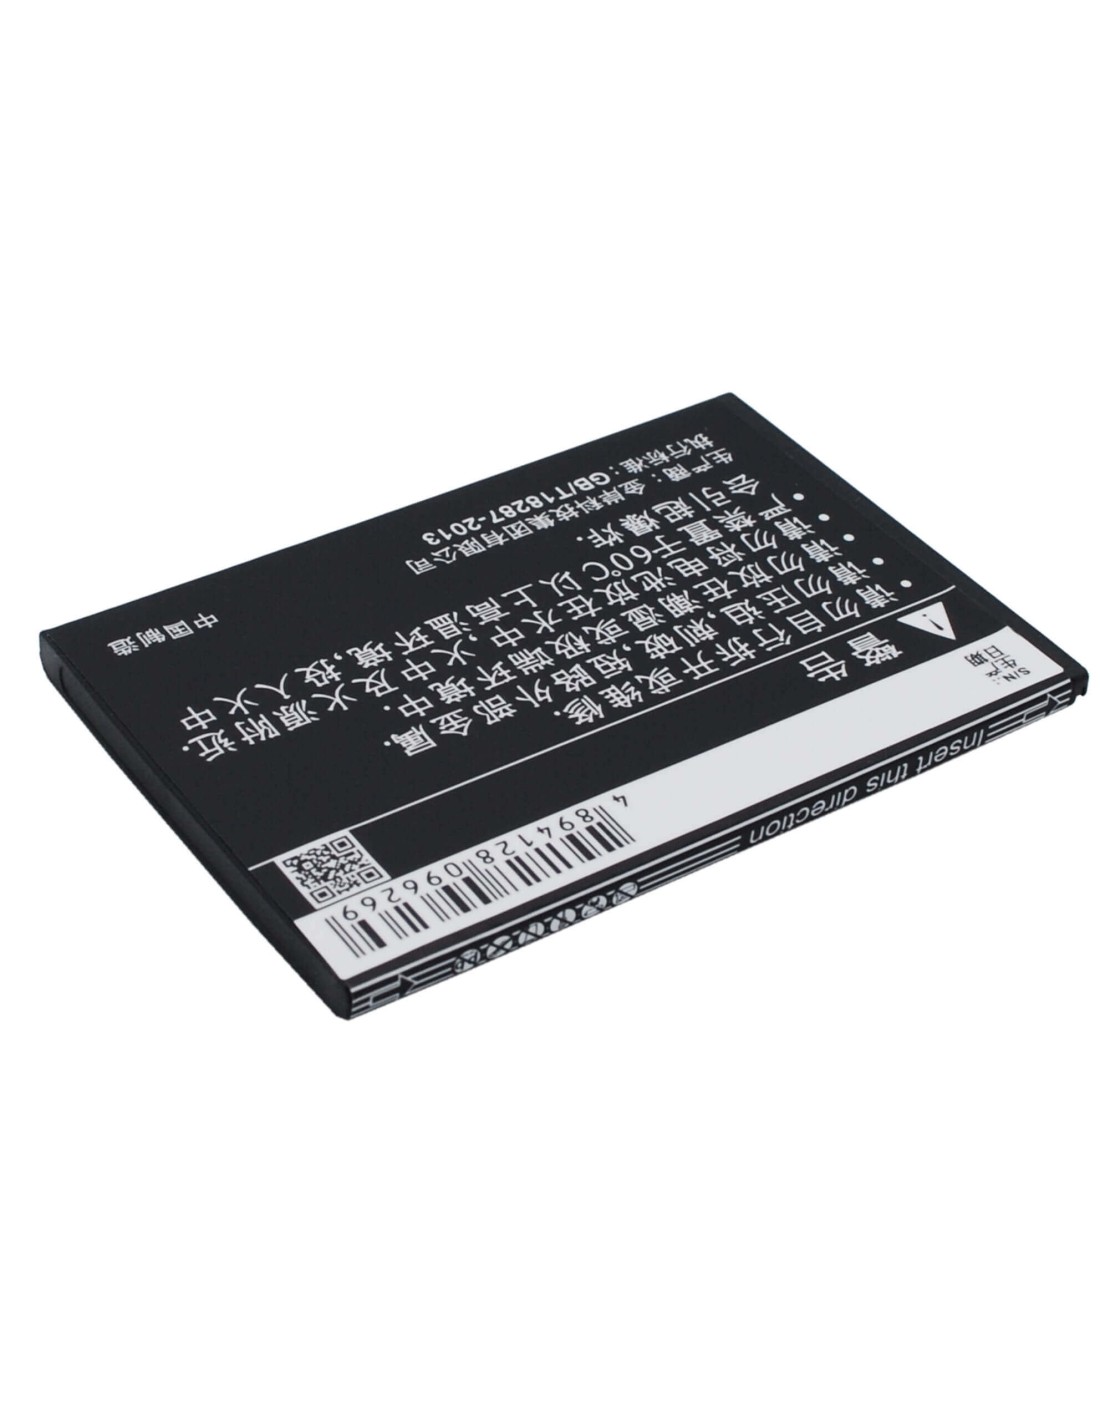 Battery for OPPO Find 7, X9007, Find 7a 3.7V, 2100mAh - 7.77Wh